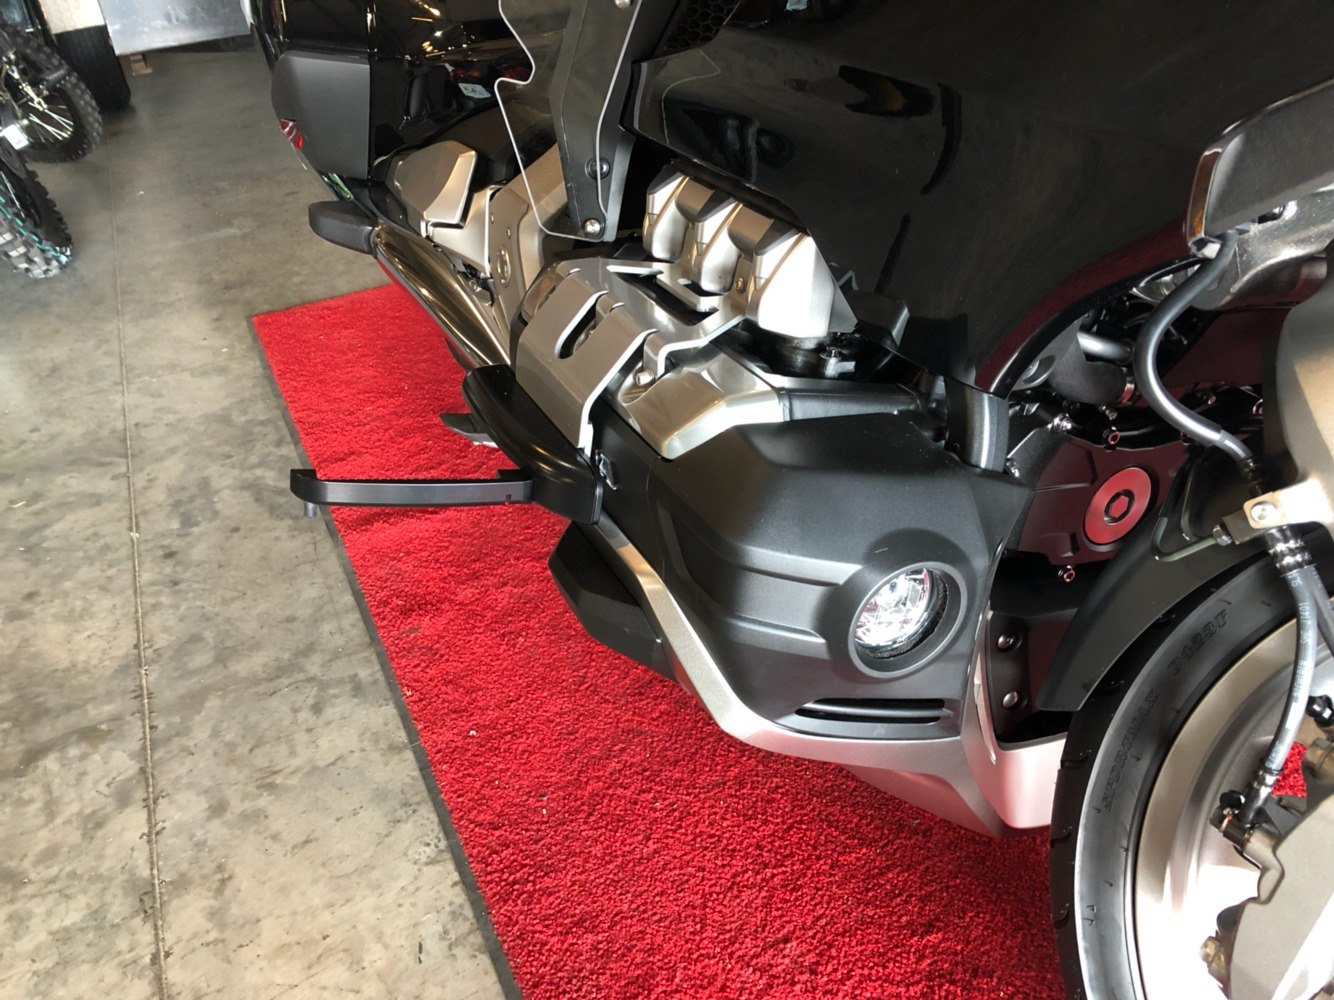 2019 Honda Gold Wing Tour Automatic DCT in Davenport, Iowa - Photo 2